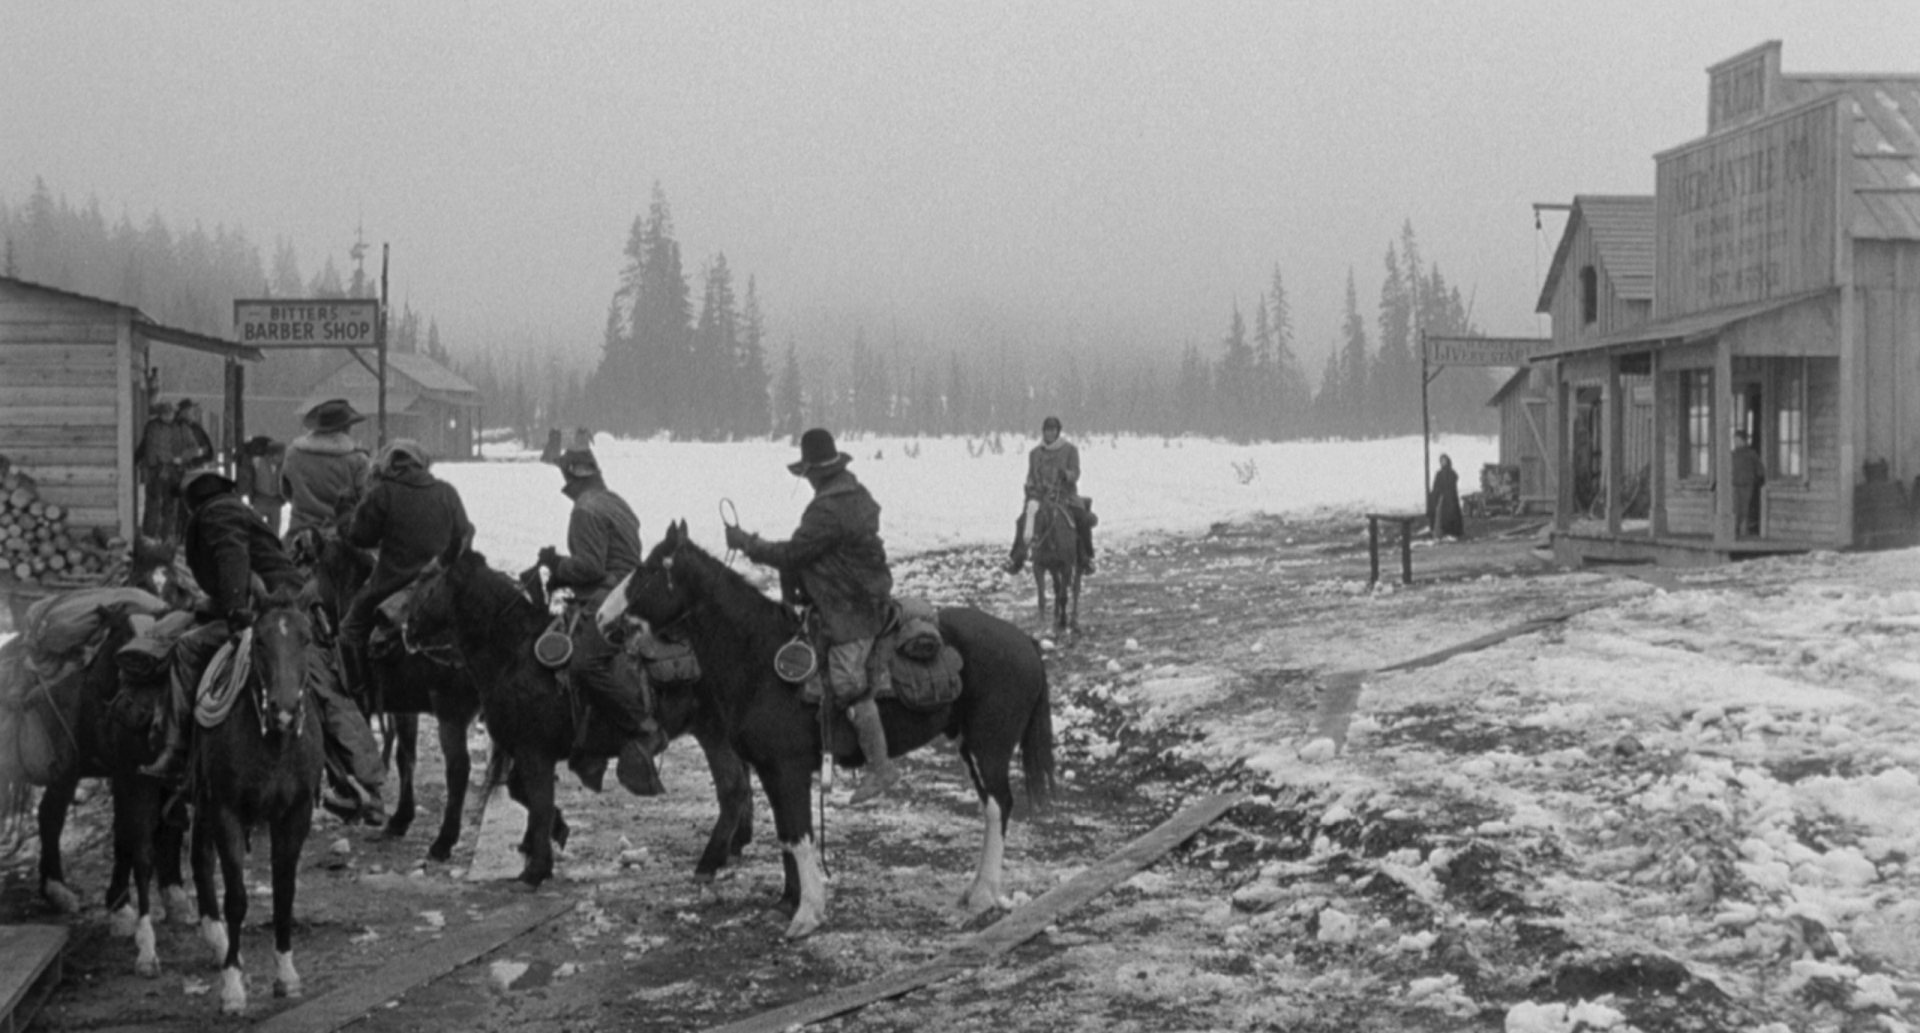 View into the slush-covered street of a tiny village; in the foreground are some riders on horseback waiting, in the background an endless wilderness is hinted at.